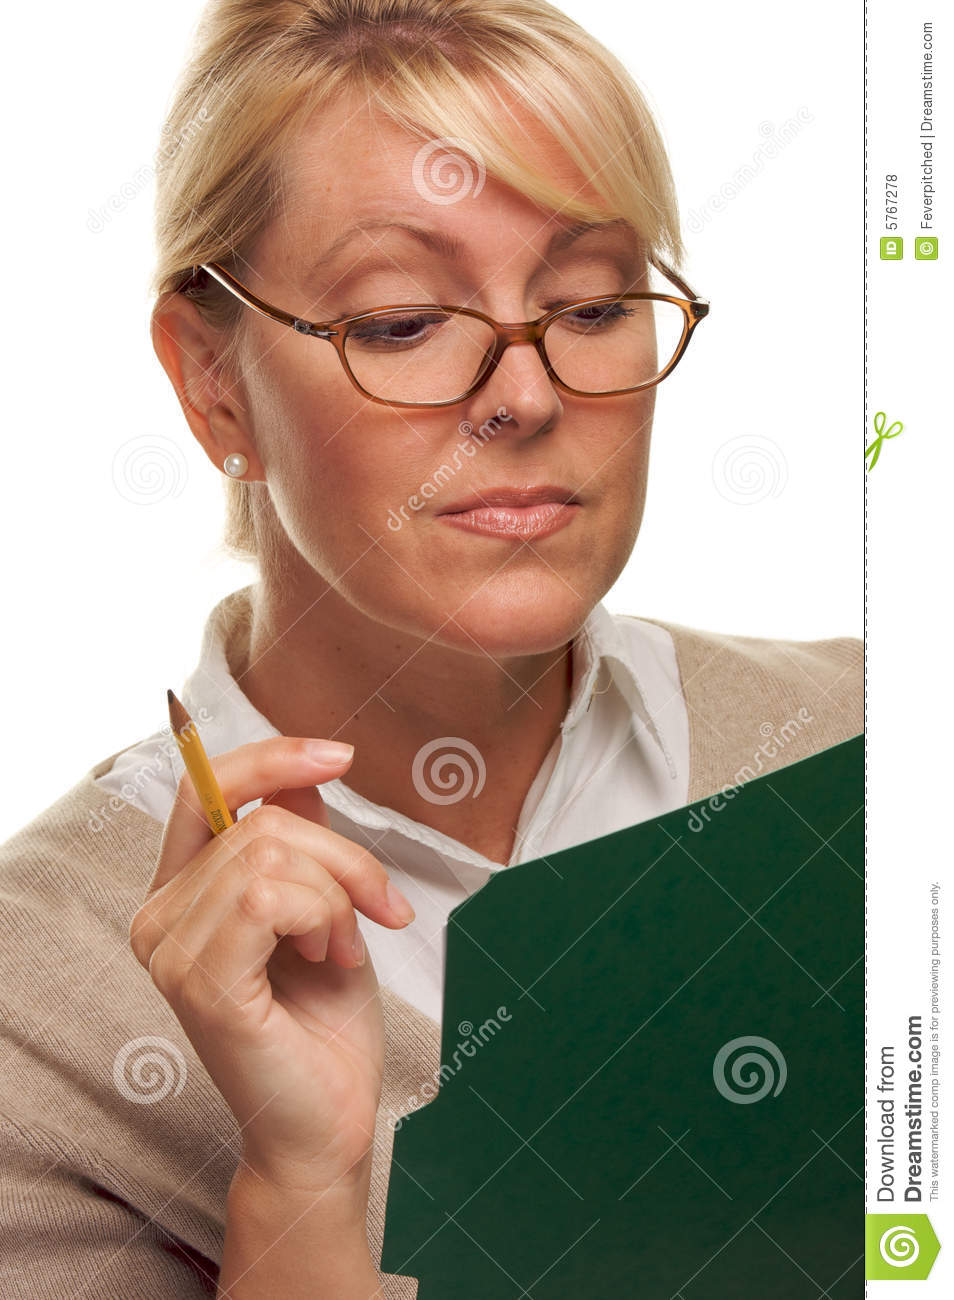 Clever Girl Reads A File Royalty Free Stock Photos   Image  5767278